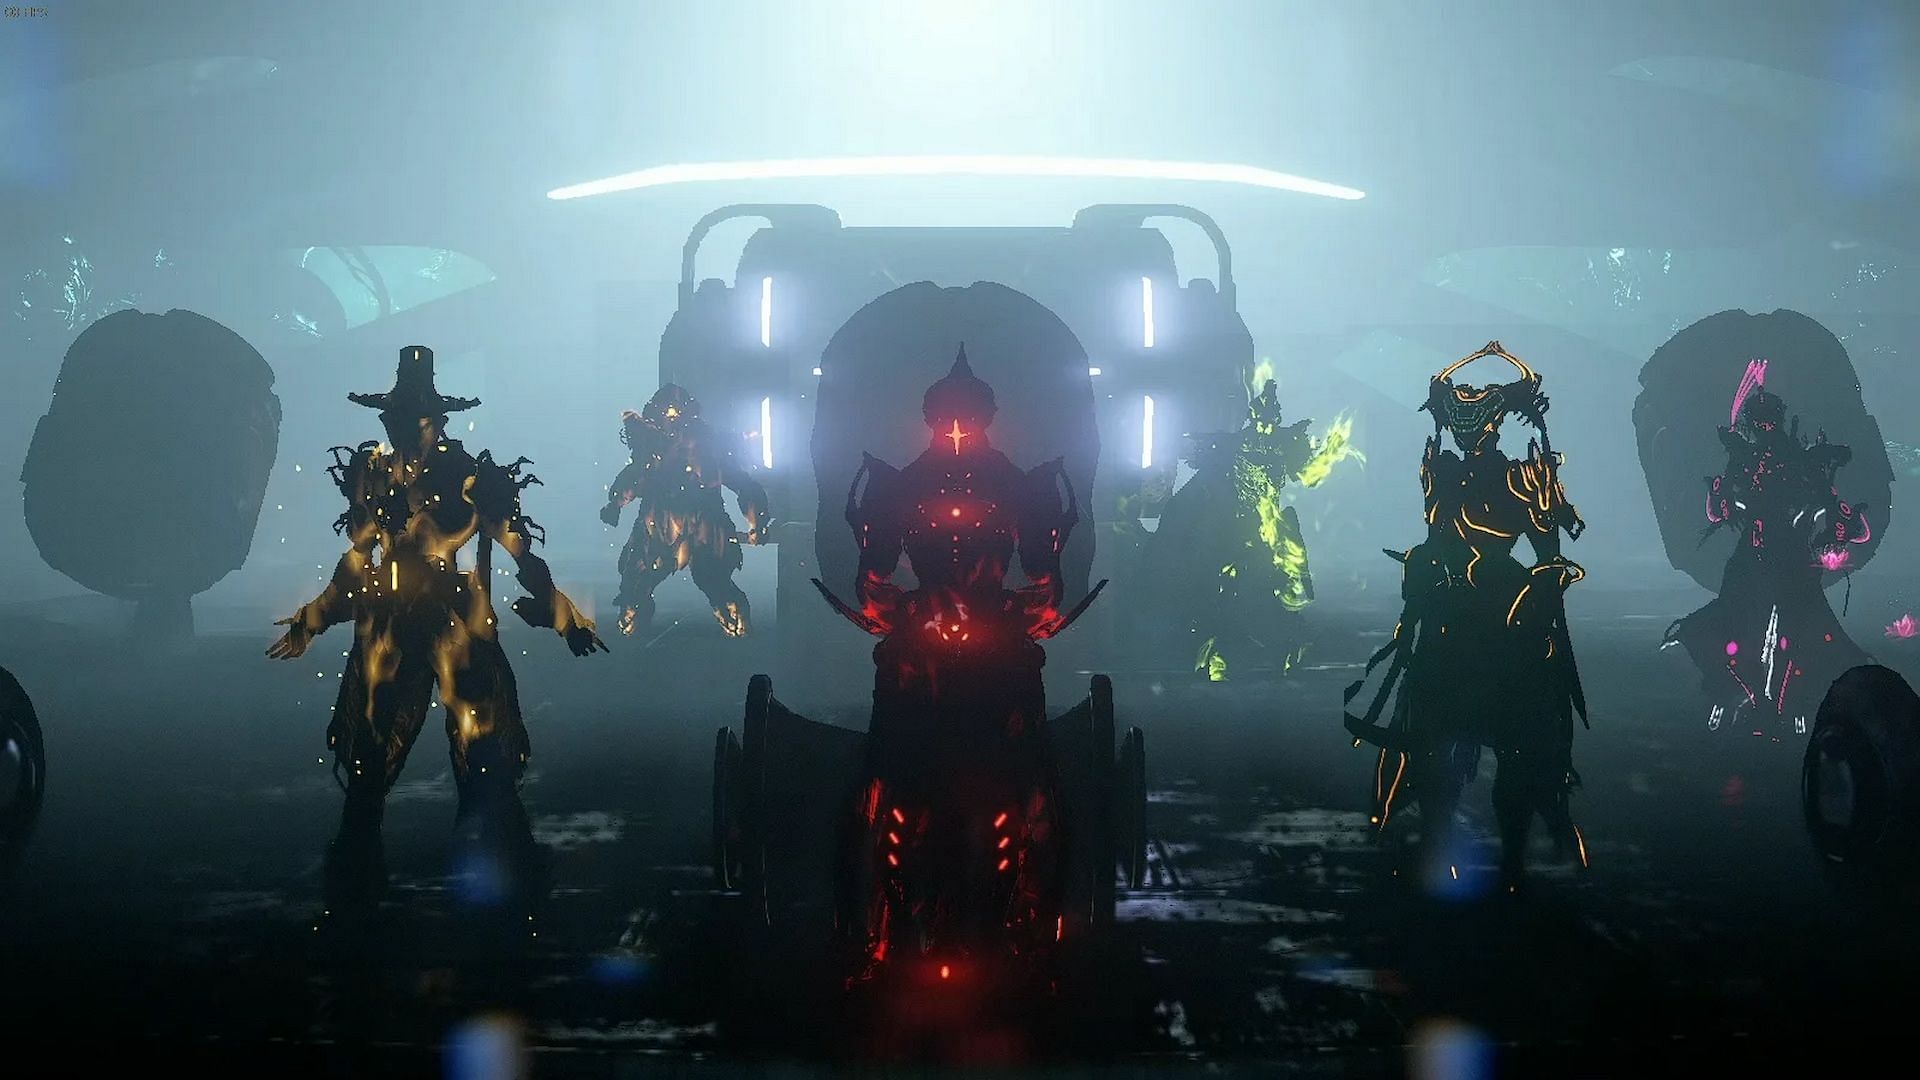 Warframe captura at the operator chamber of the Orbiter featuring Limbo, Grendel, Harrow, Volt, Trinity, and others